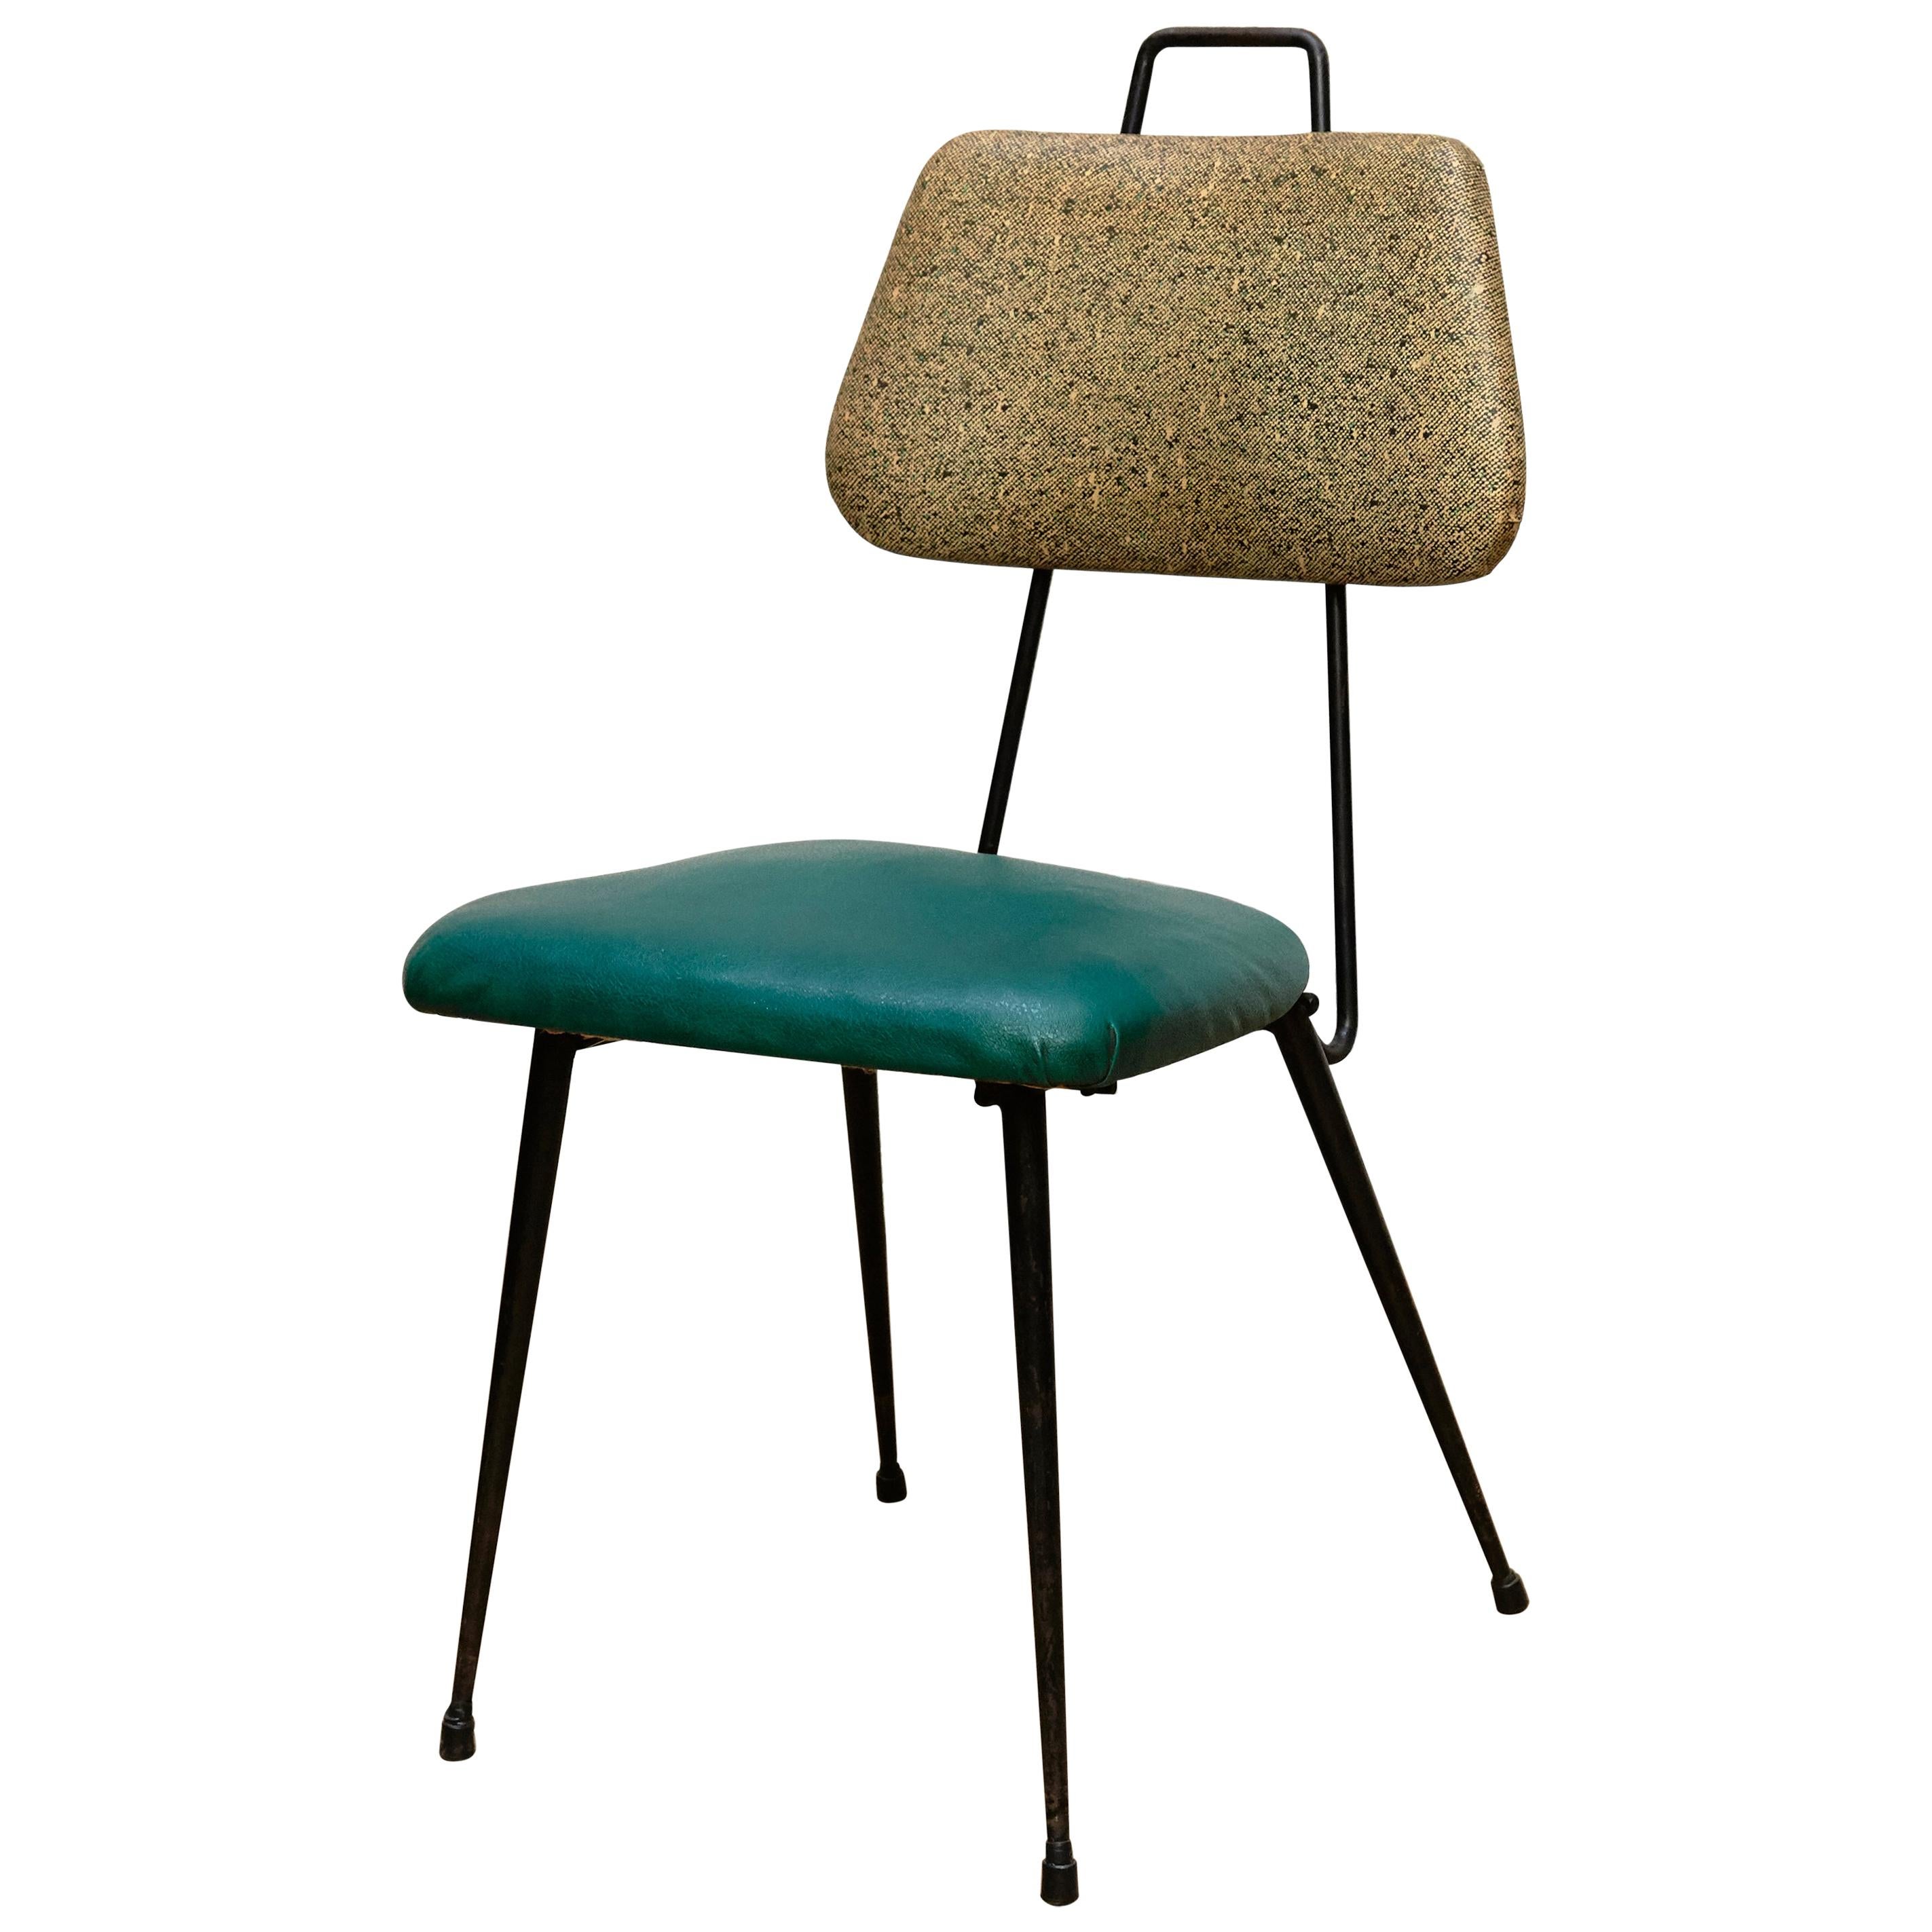 Hermanos Vidal Skie and Lacquered Metal Mid-Century Modern Chair, circa 1950